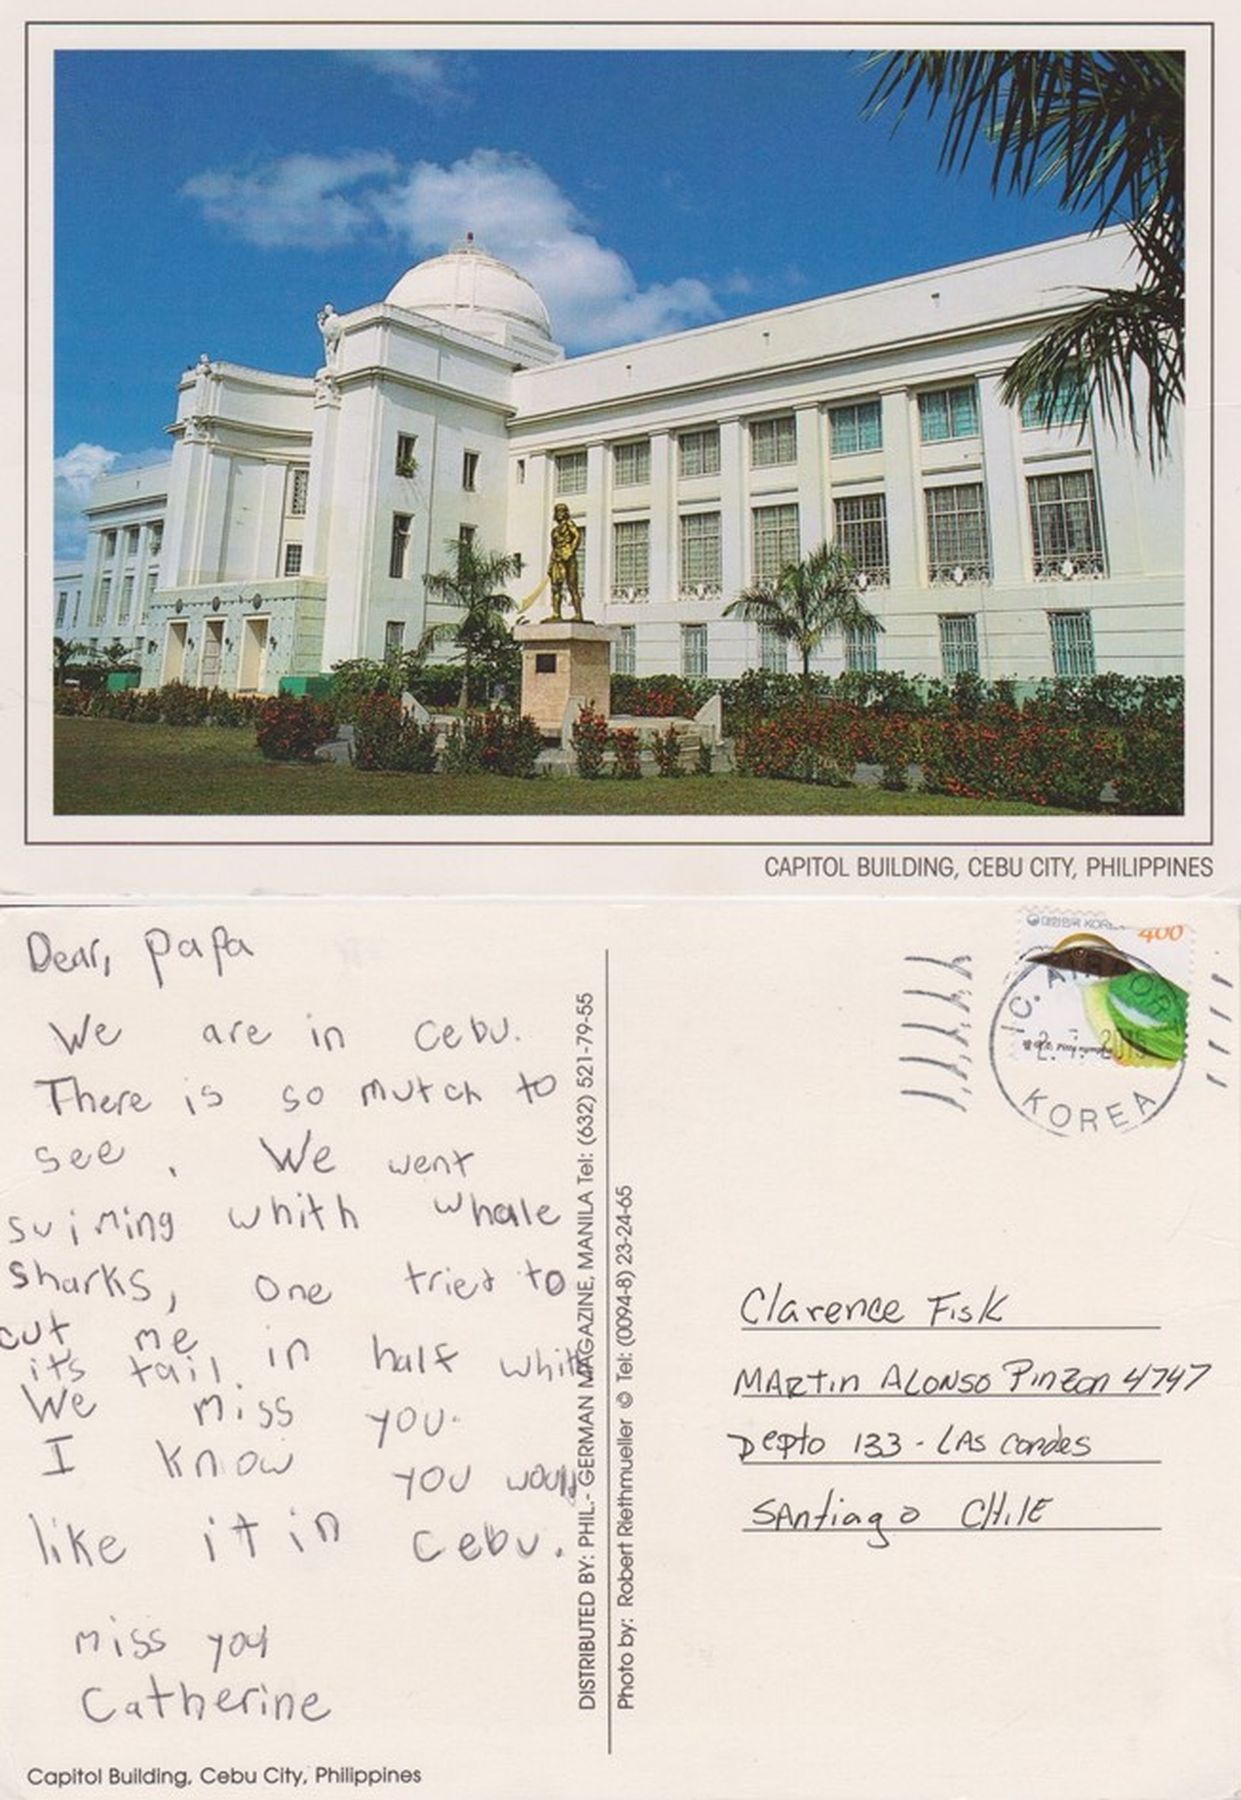 {}{<> Catherine Rose Kirkwood};{[|] Post Cards from Grandchildren};{Capitol Building};{Papa};{eTg};{Cebu};{SIC Catherine};{@Place=Cebu Philippines};{@Date=2015};{@Author=Clarence Fisk ll};{[ATHR]Clarence Fisk ll